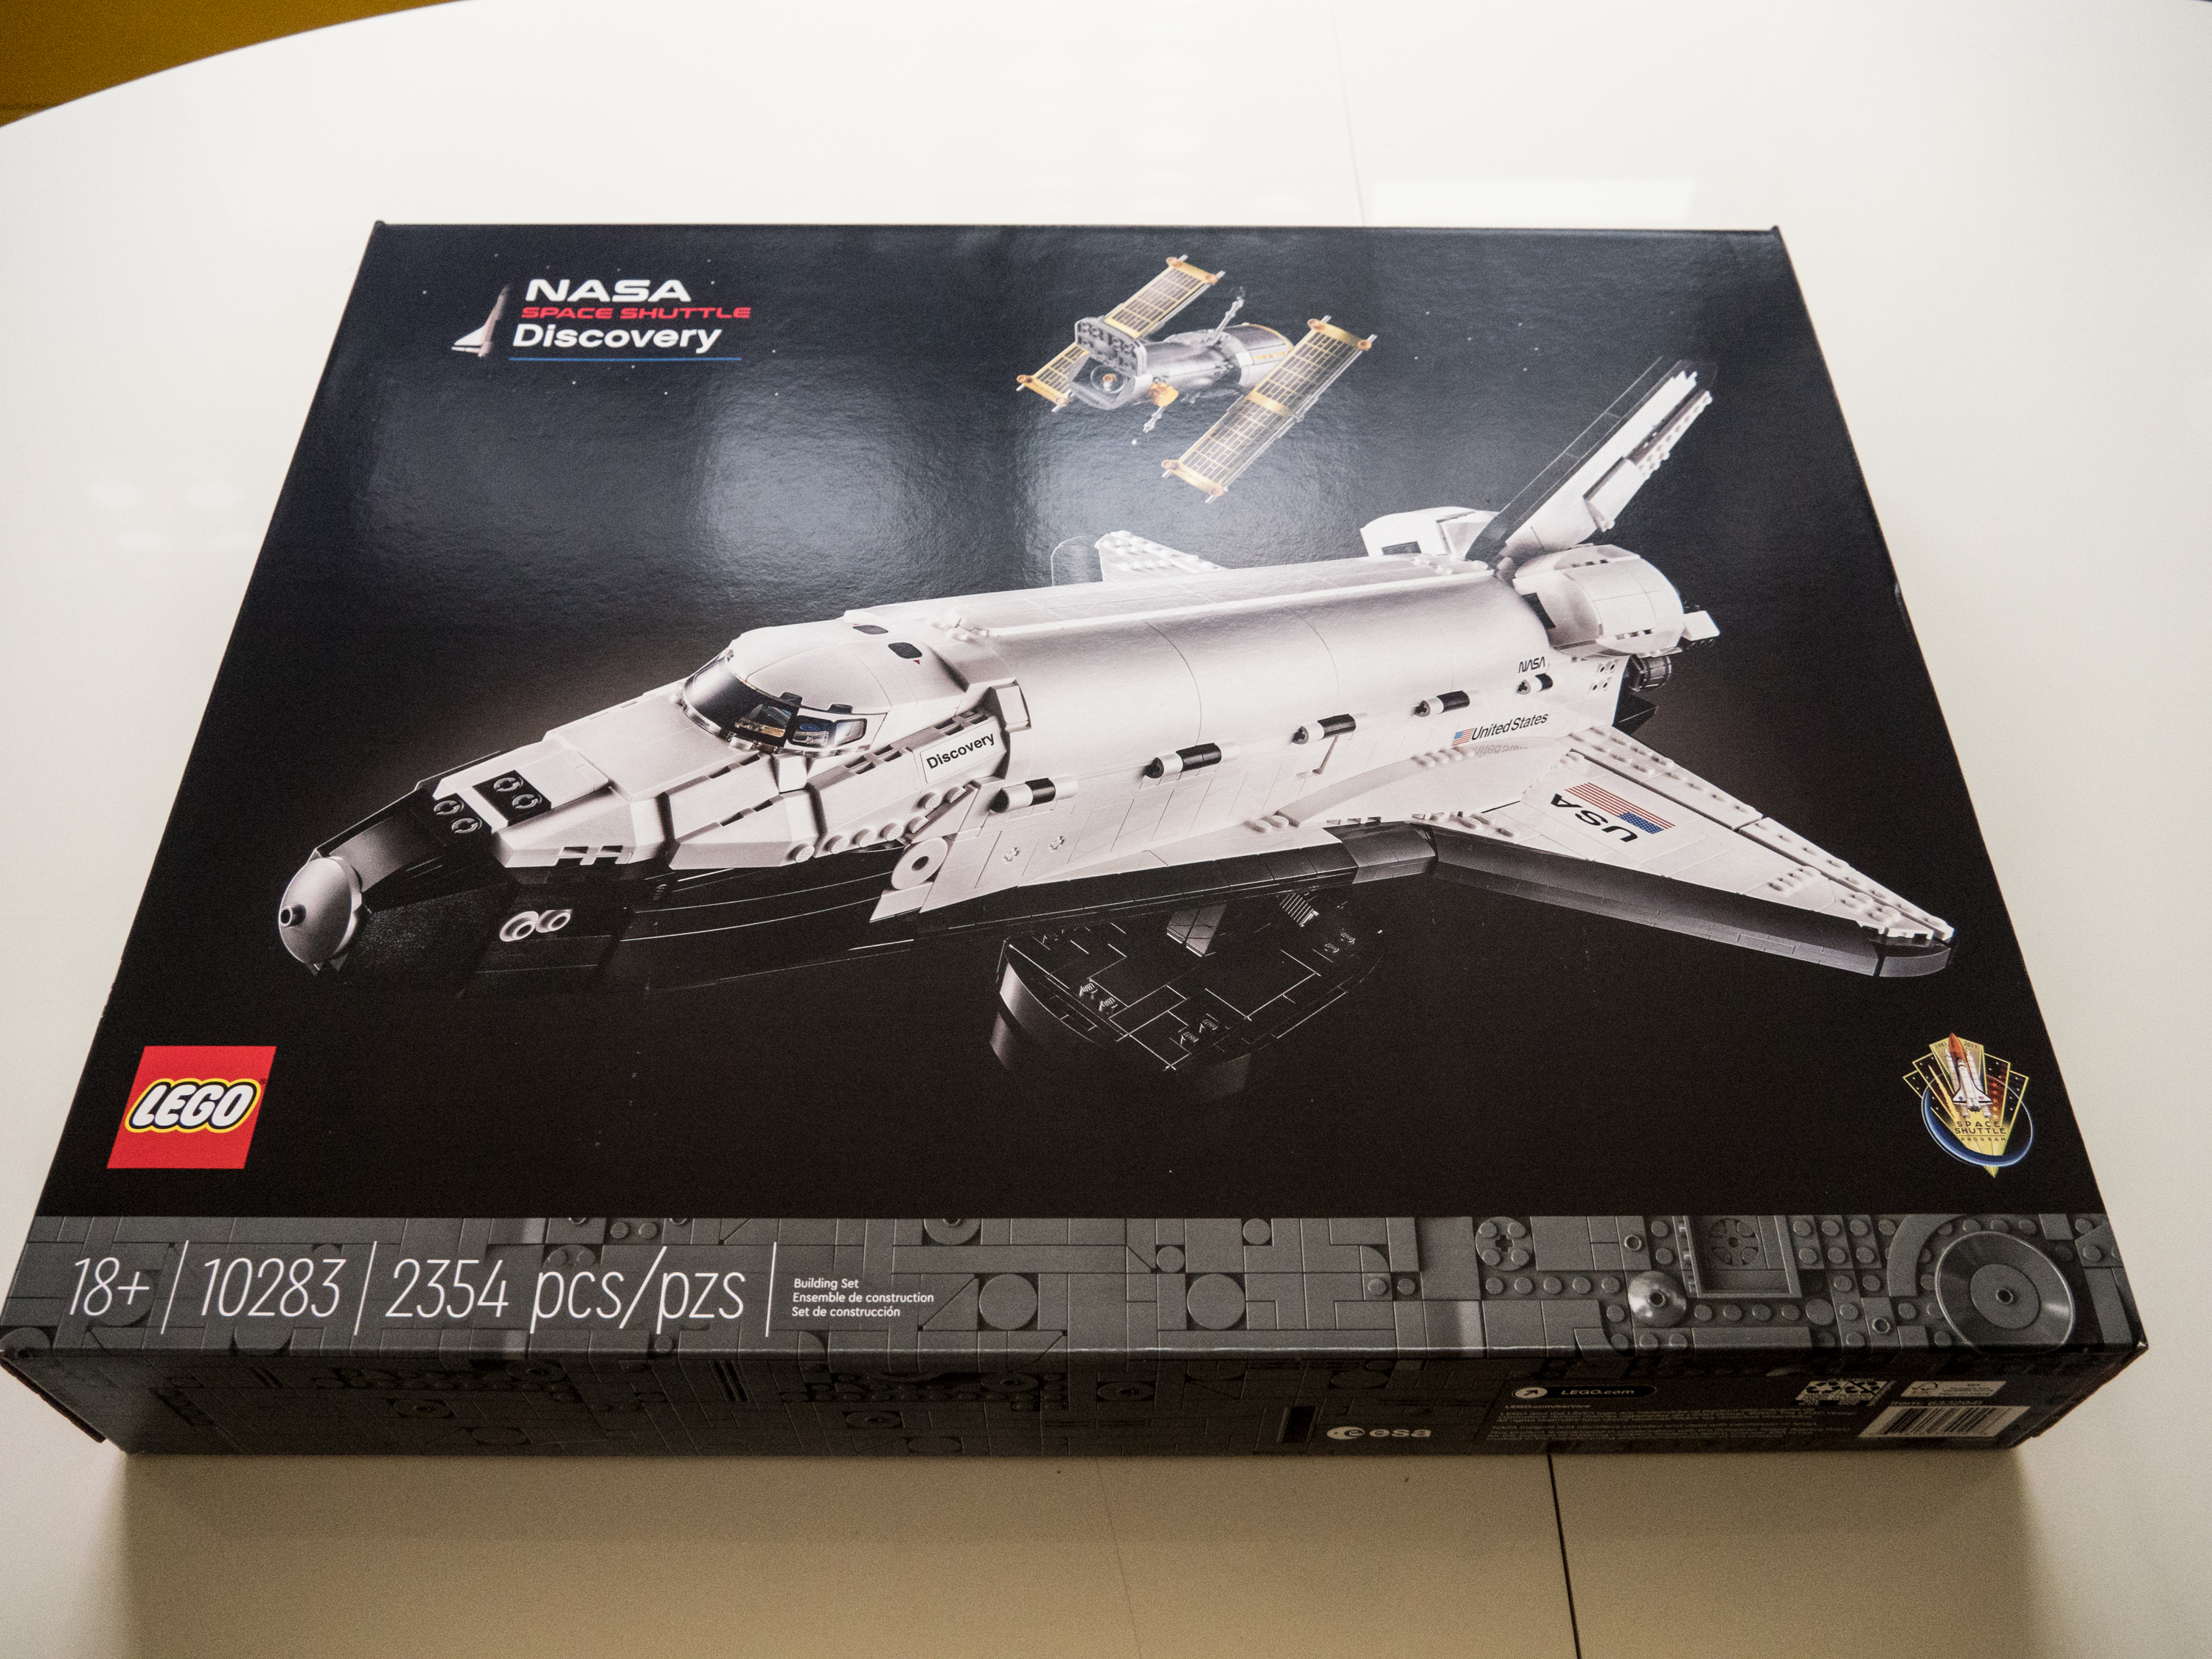 Lego has a new 2,354-piece NASA Space Shuttle set, and it's awesome